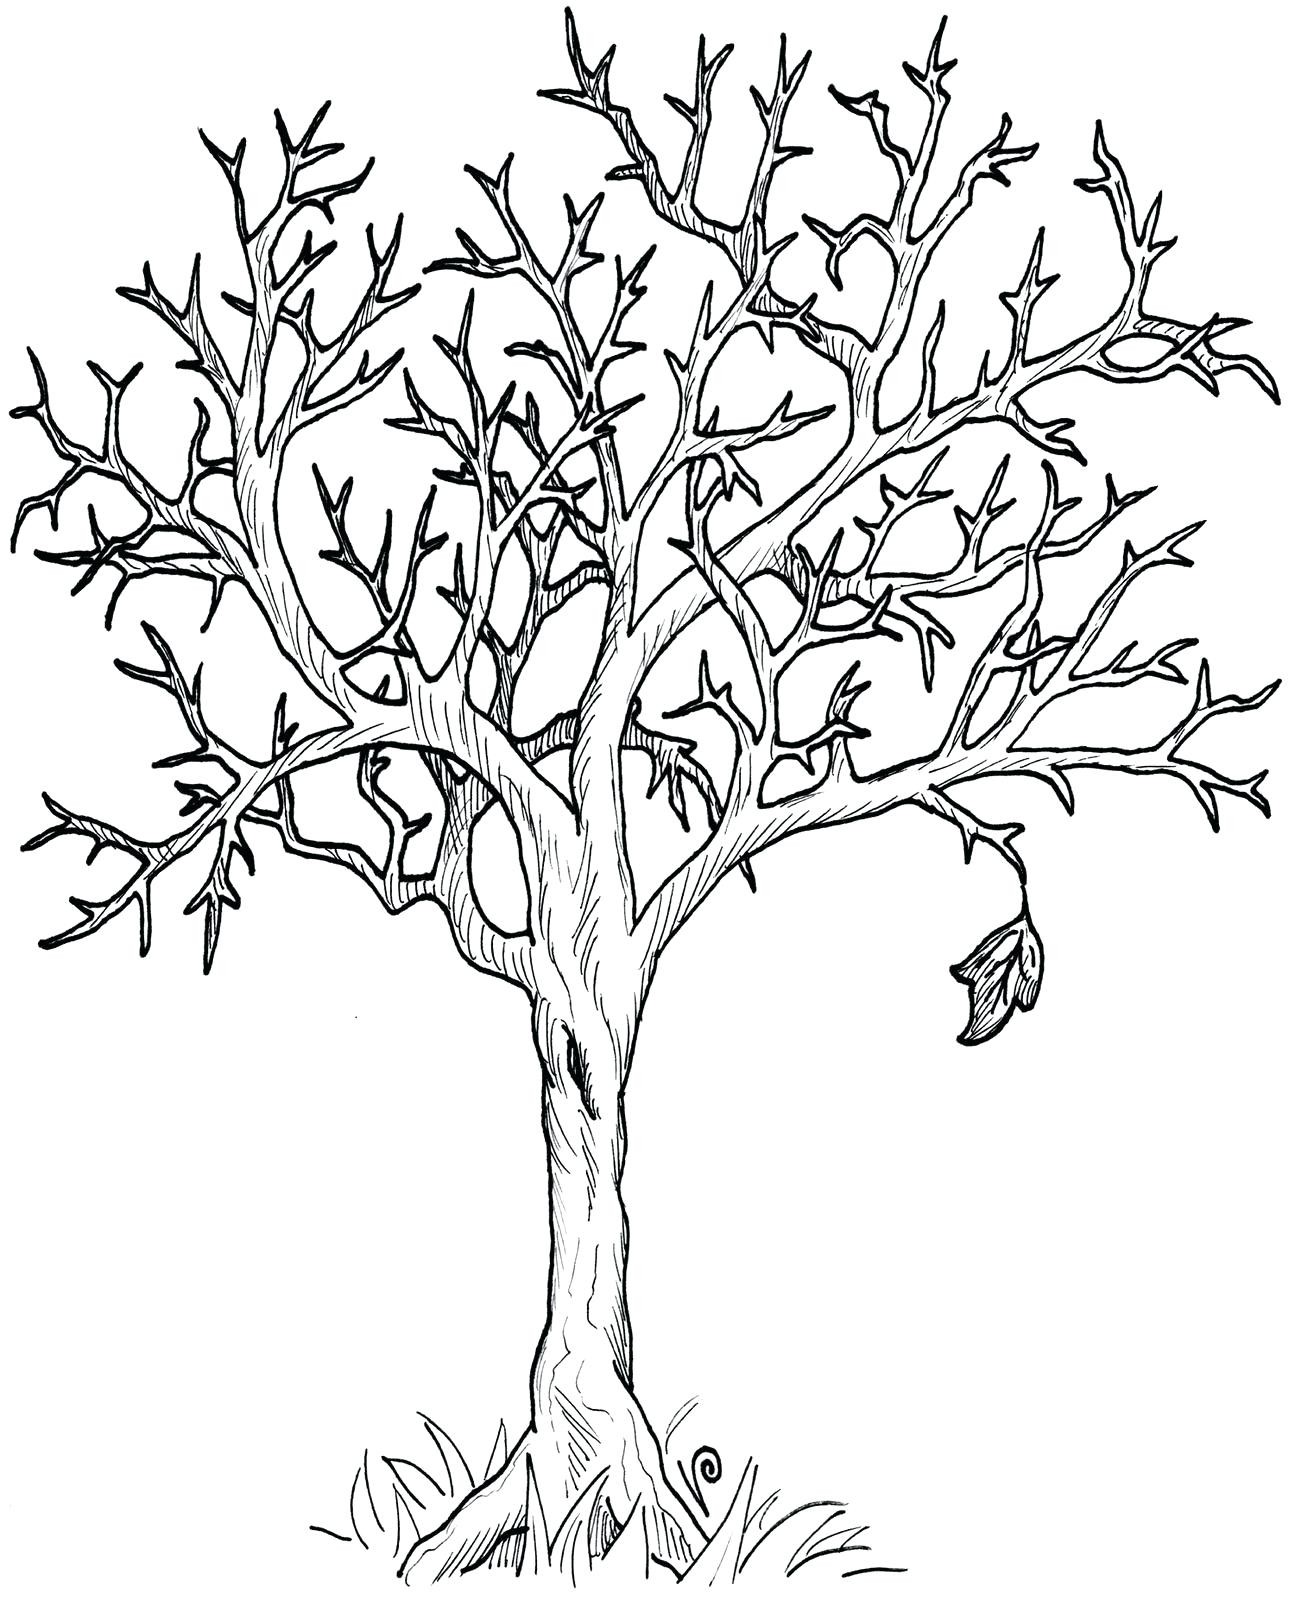 Tree Trunk Coloring Page at GetColorings.com | Free printable colorings